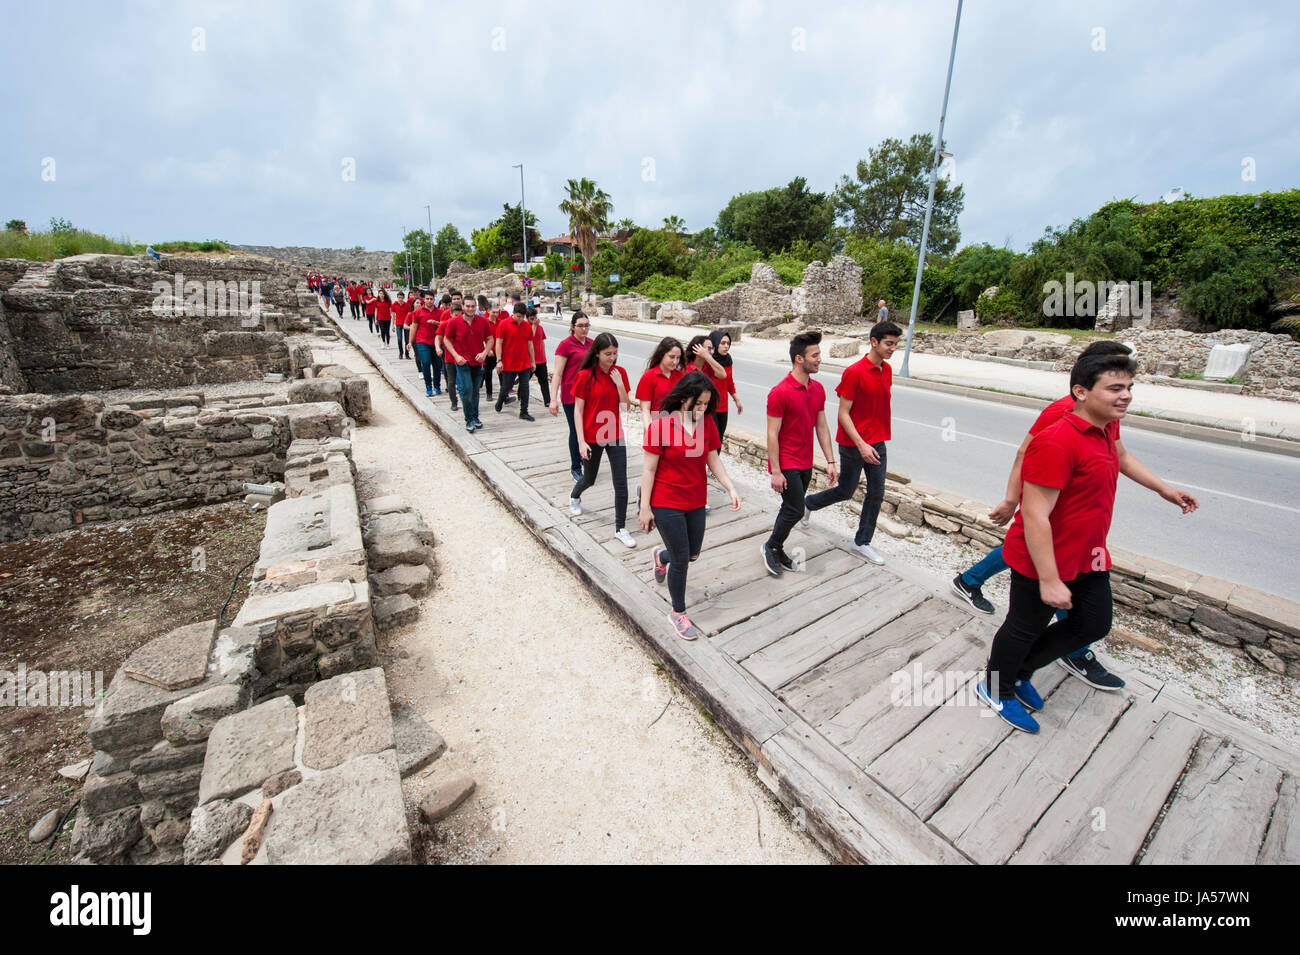 Marching young Turks dressed in red shirts going through antique area in Side, Antalya Province, Turkey. Stock Photo